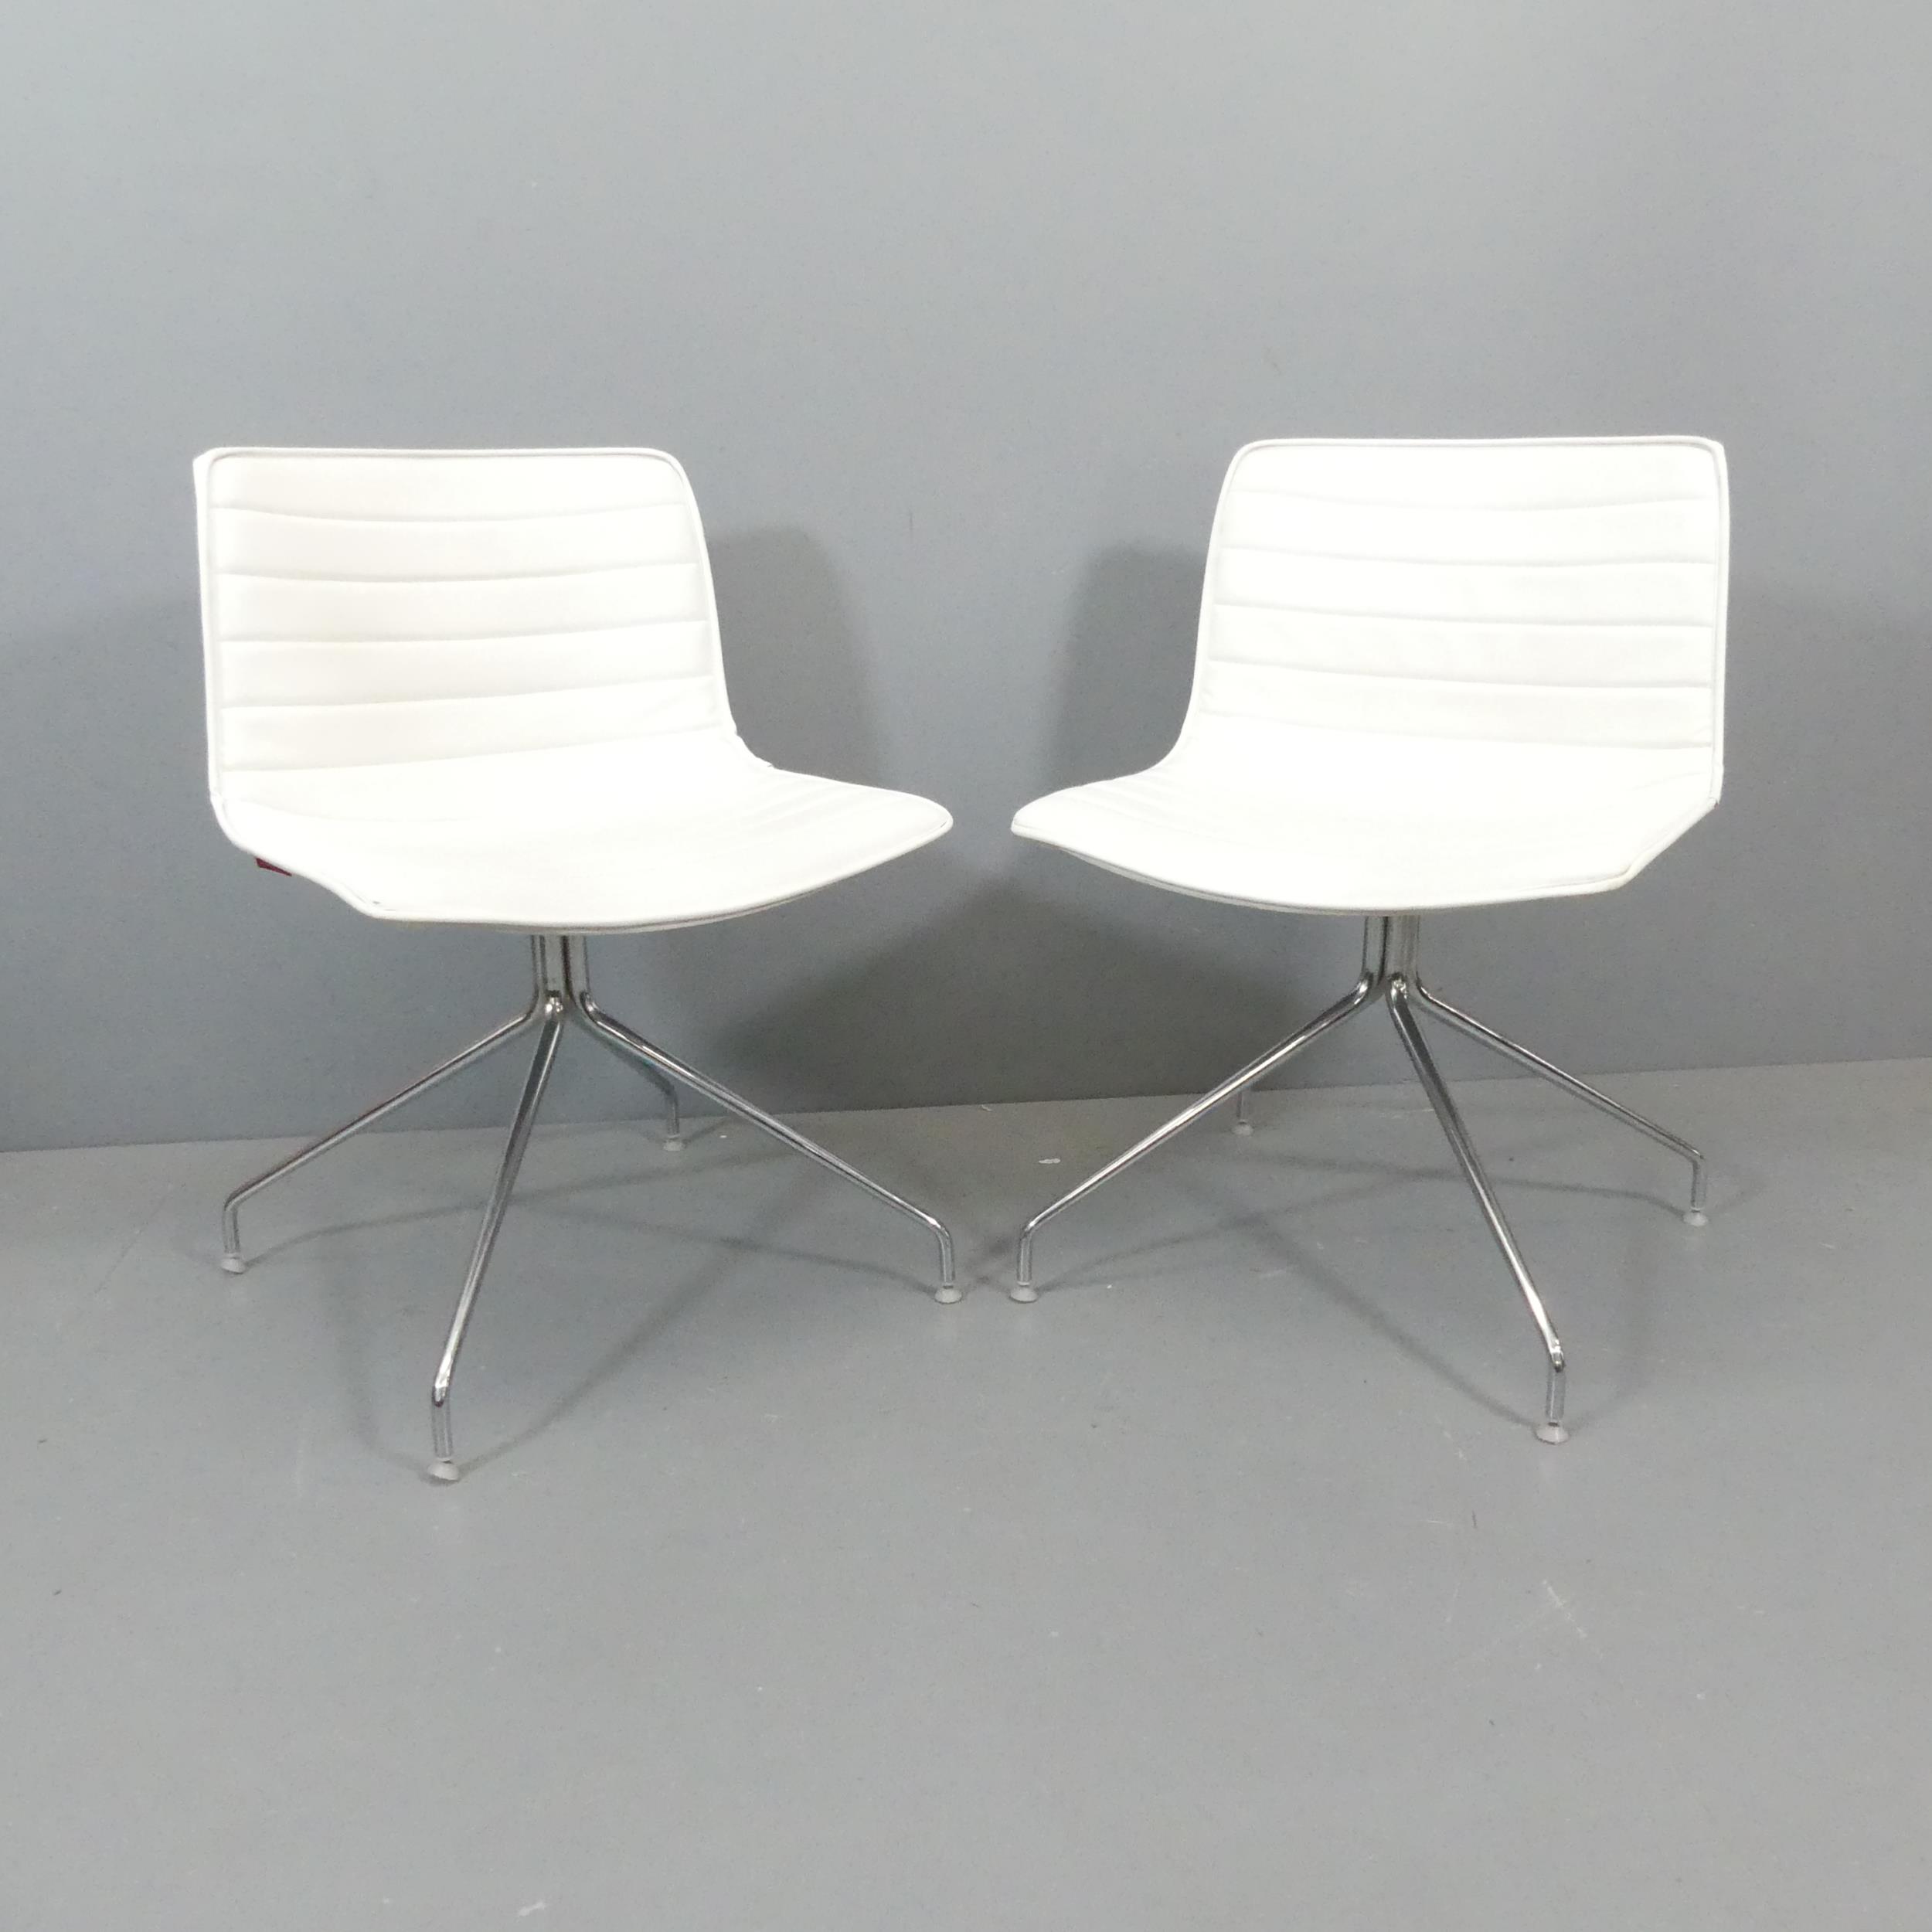 ARPER - A pair of Catifa 4 chairs in white leather, with maker's labels.